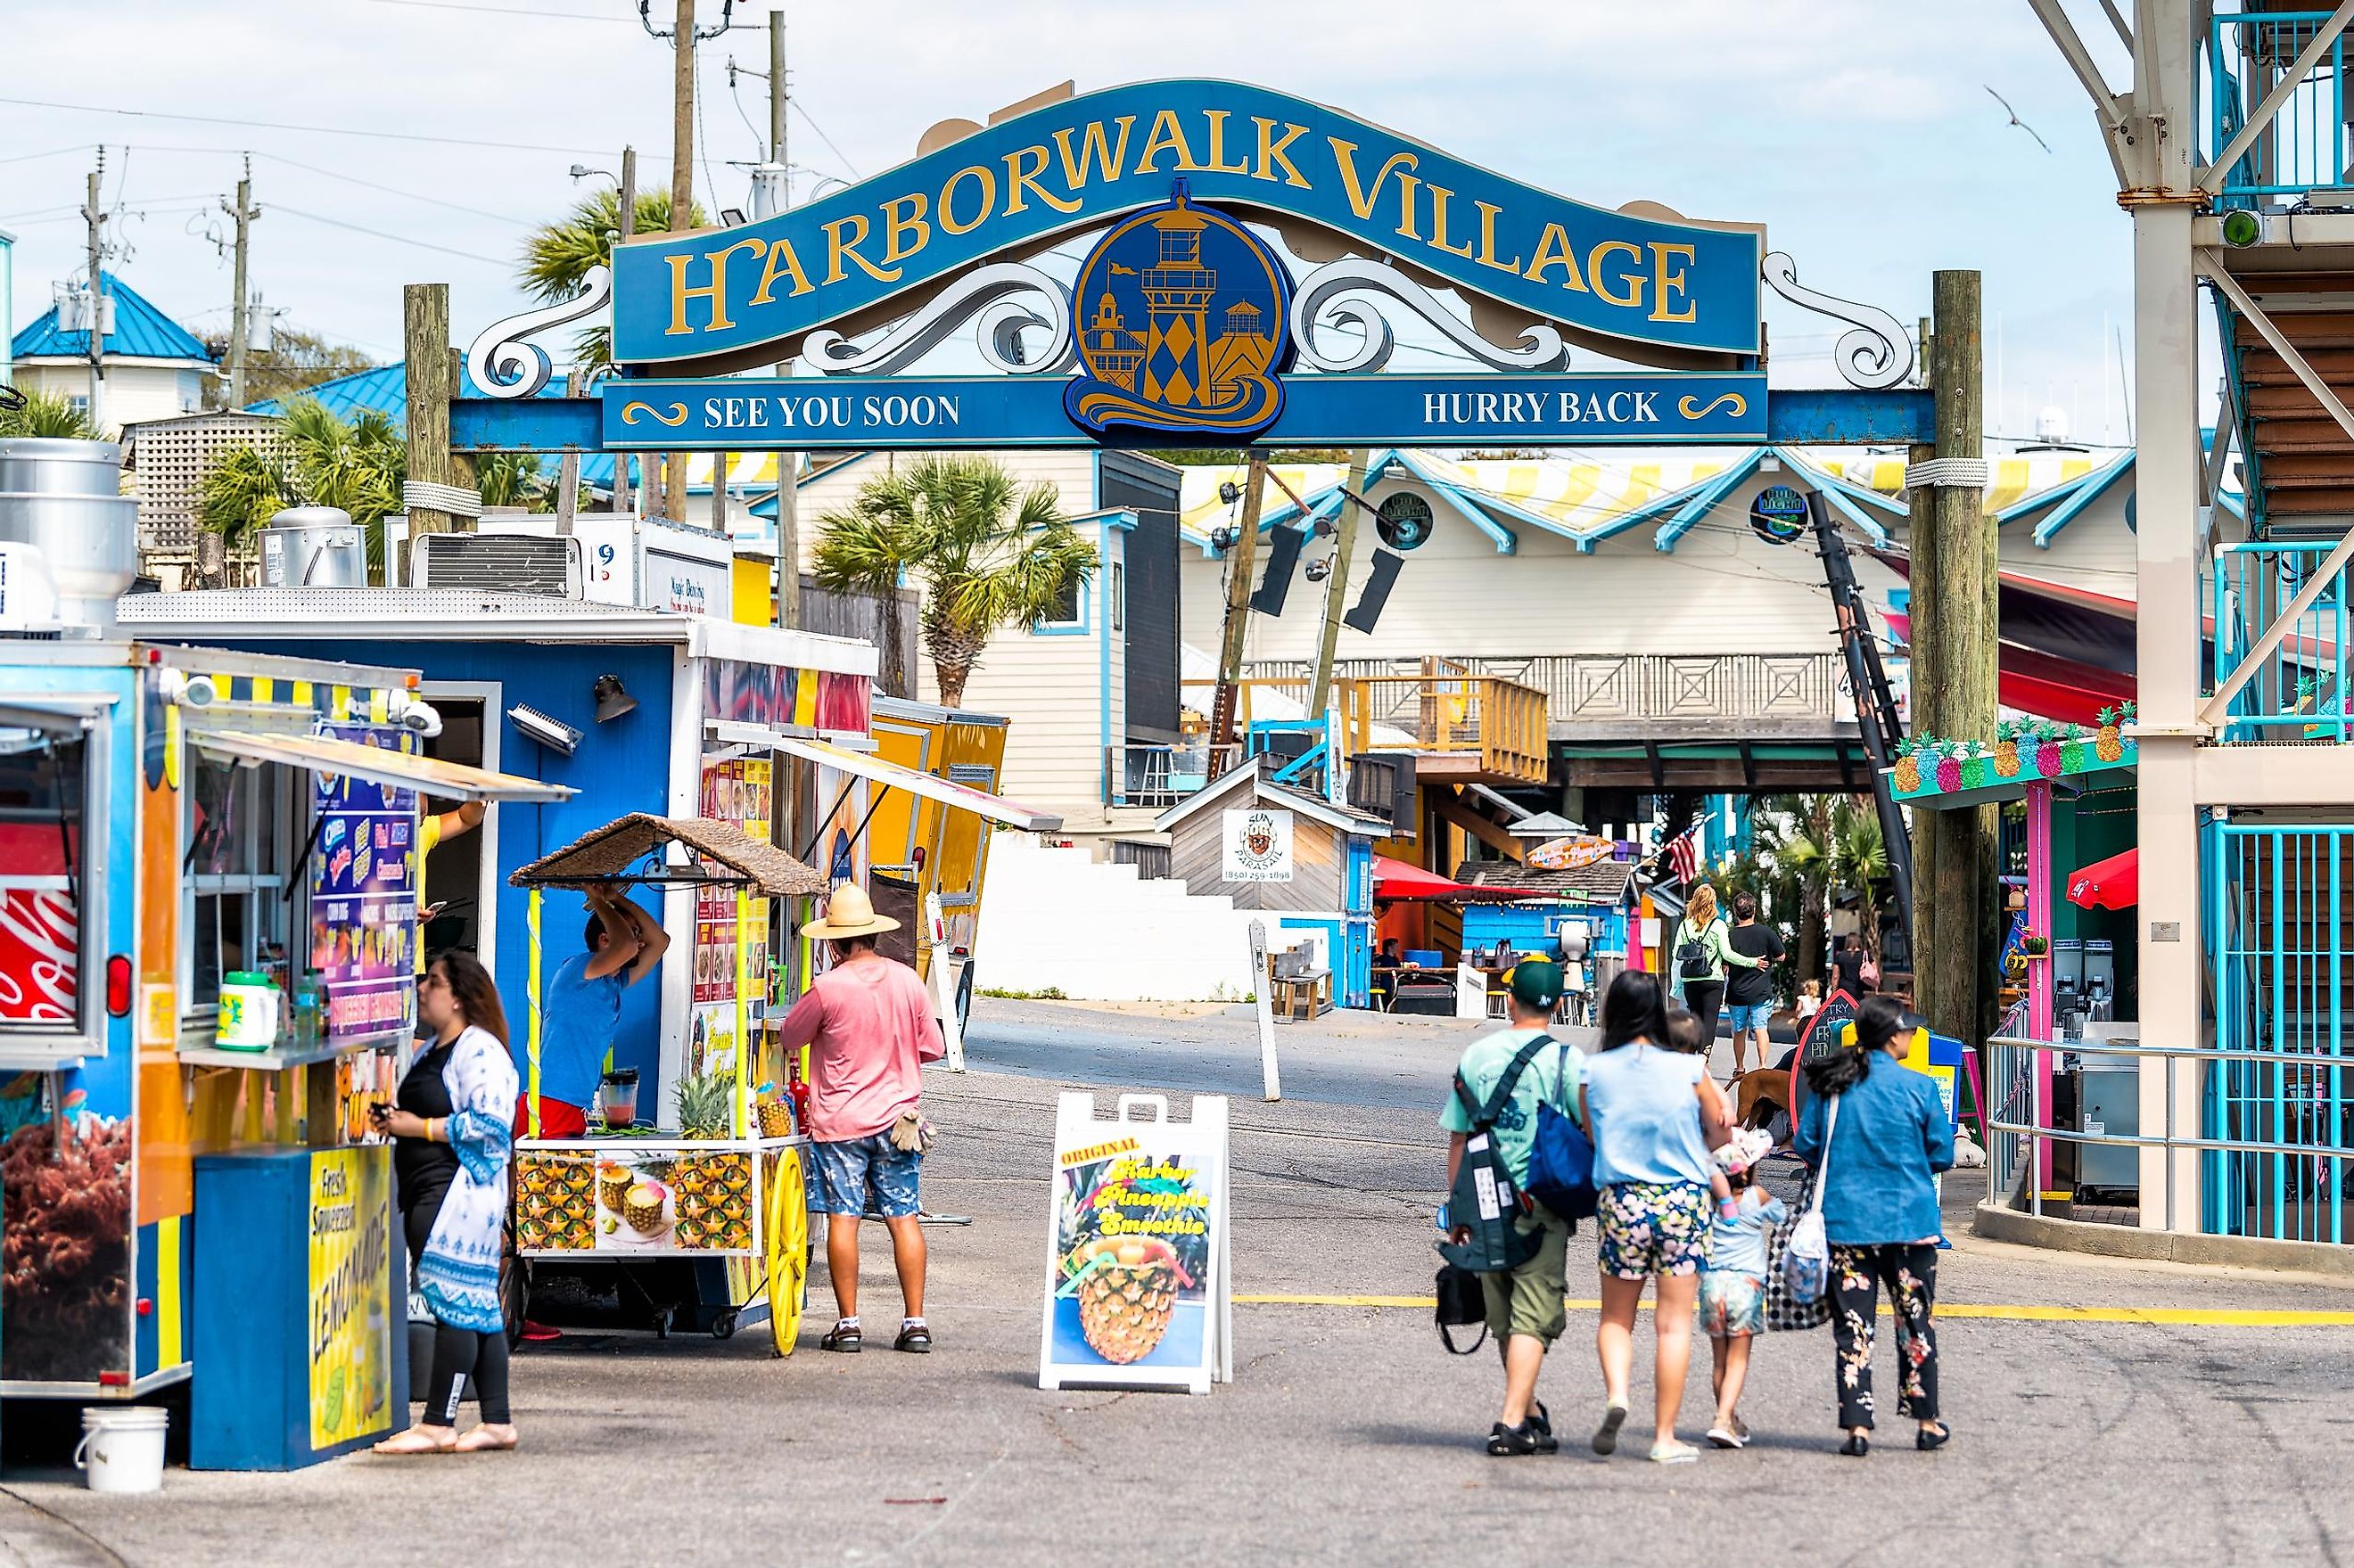 Destin: Sign for Harborwalk Village in Emerald Grande Coast in Florida Panhandle with people walking and shopping, buying food in cafes and street vendor restaurants, via Andriy Blokhin / Shutterstock.com